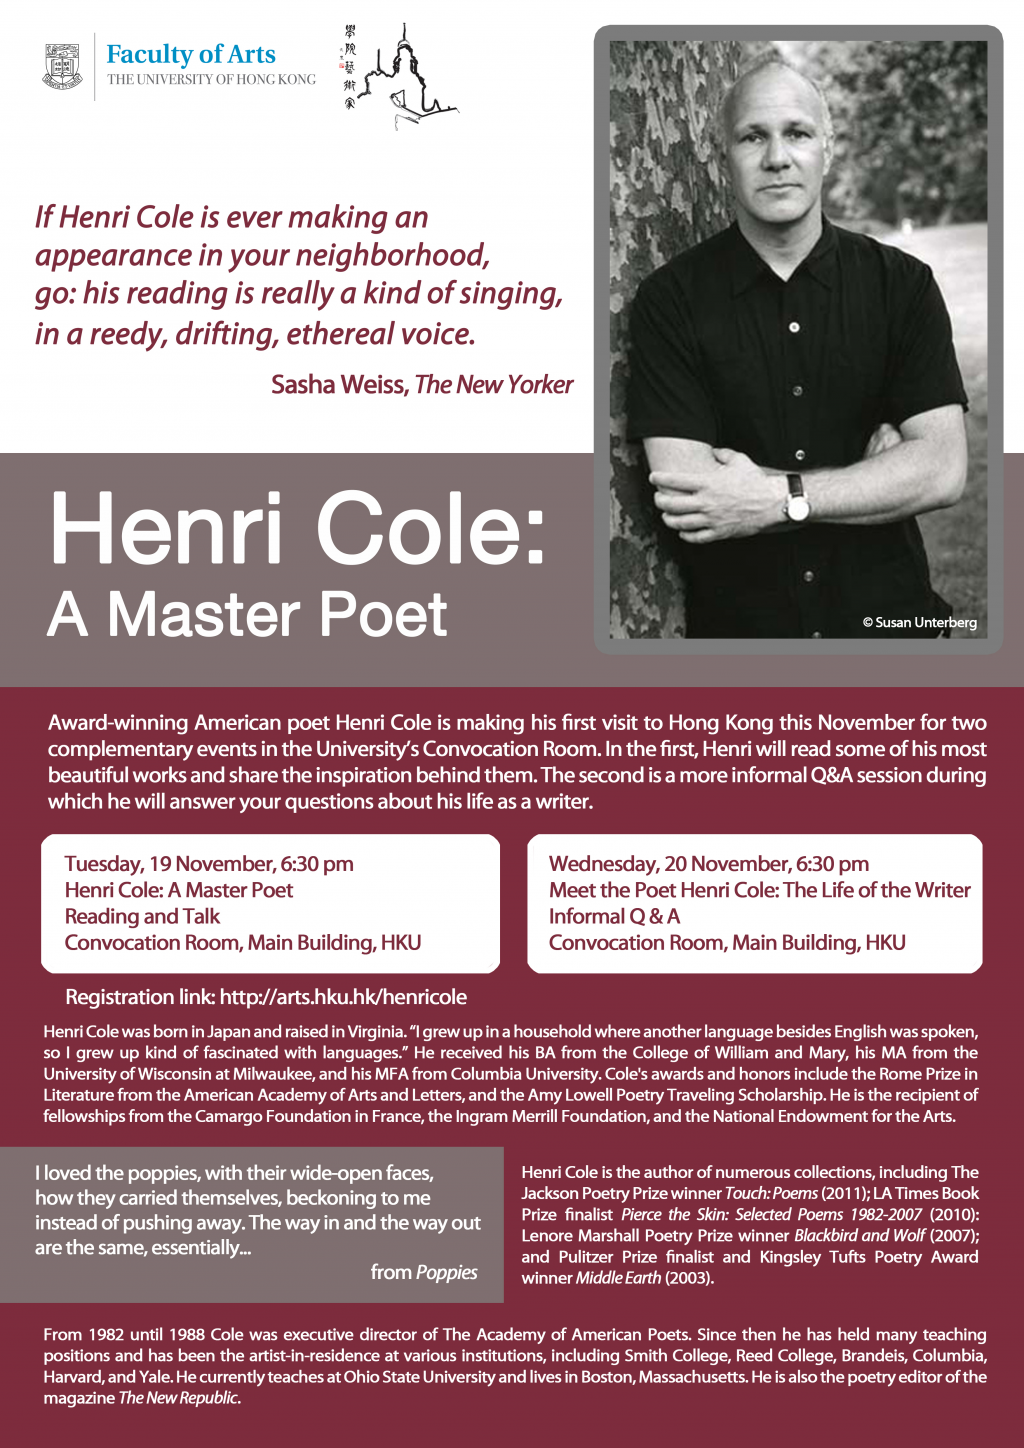 Henri Cole: A Master Poet - Events on19 